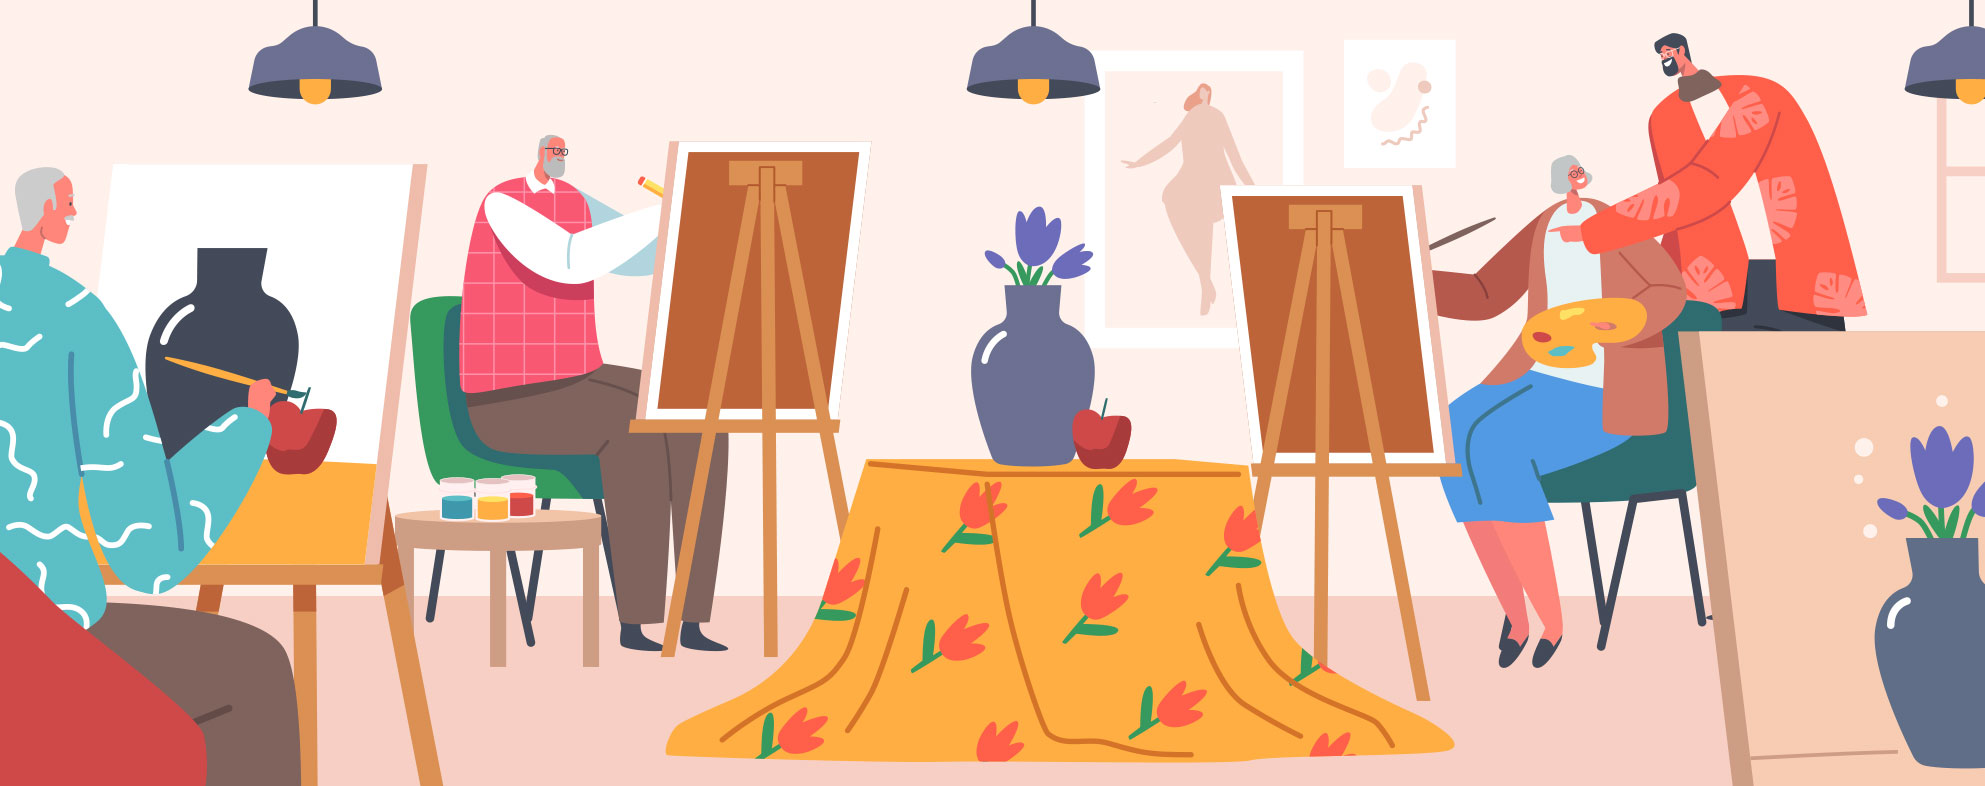 animated graphic of people in an art class painting a still life